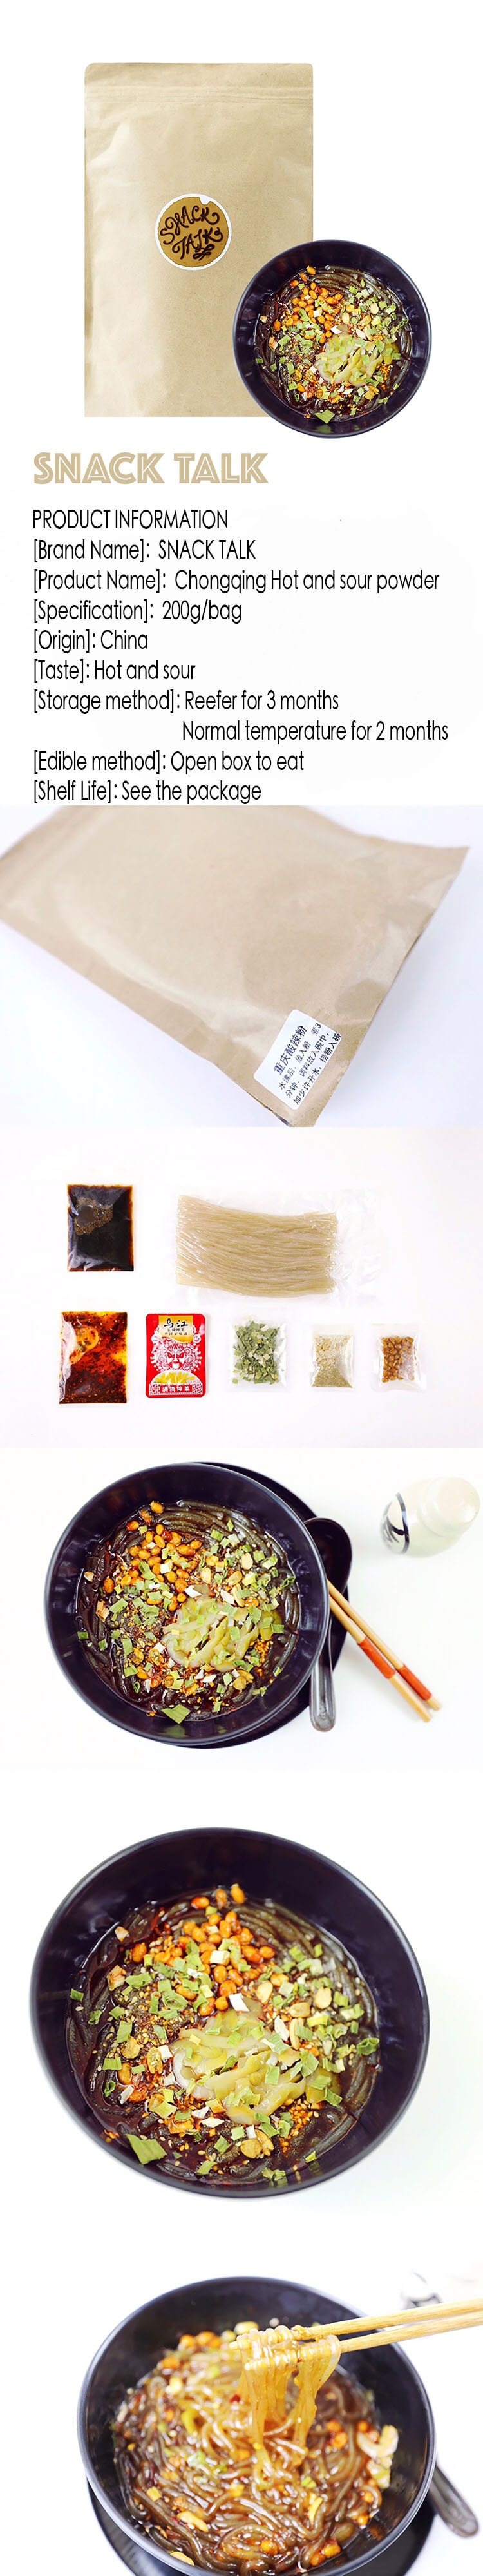 Chongqing Spicy and Sour Noodle 200g